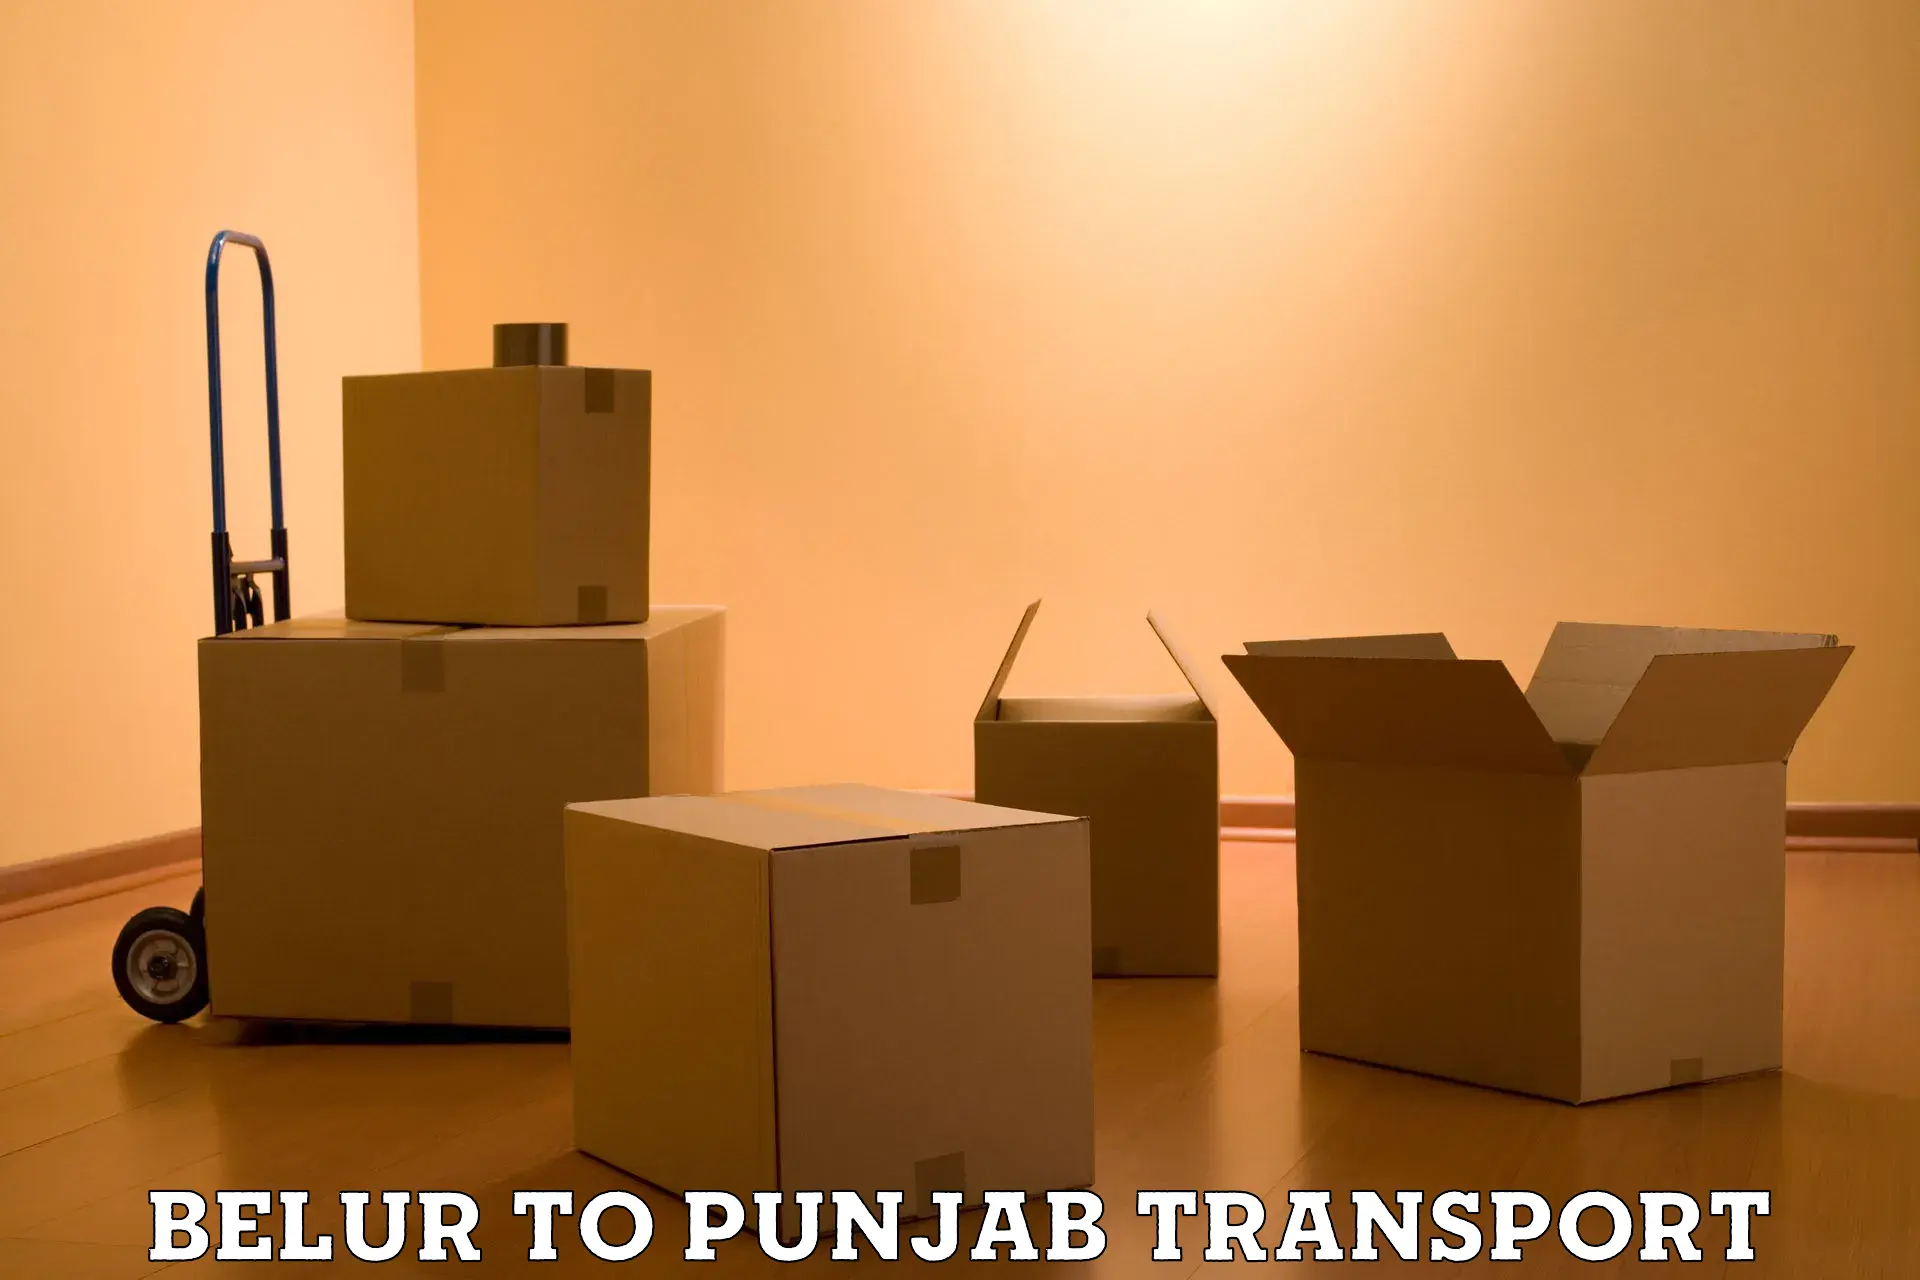 Nearby transport service Belur to Mohali